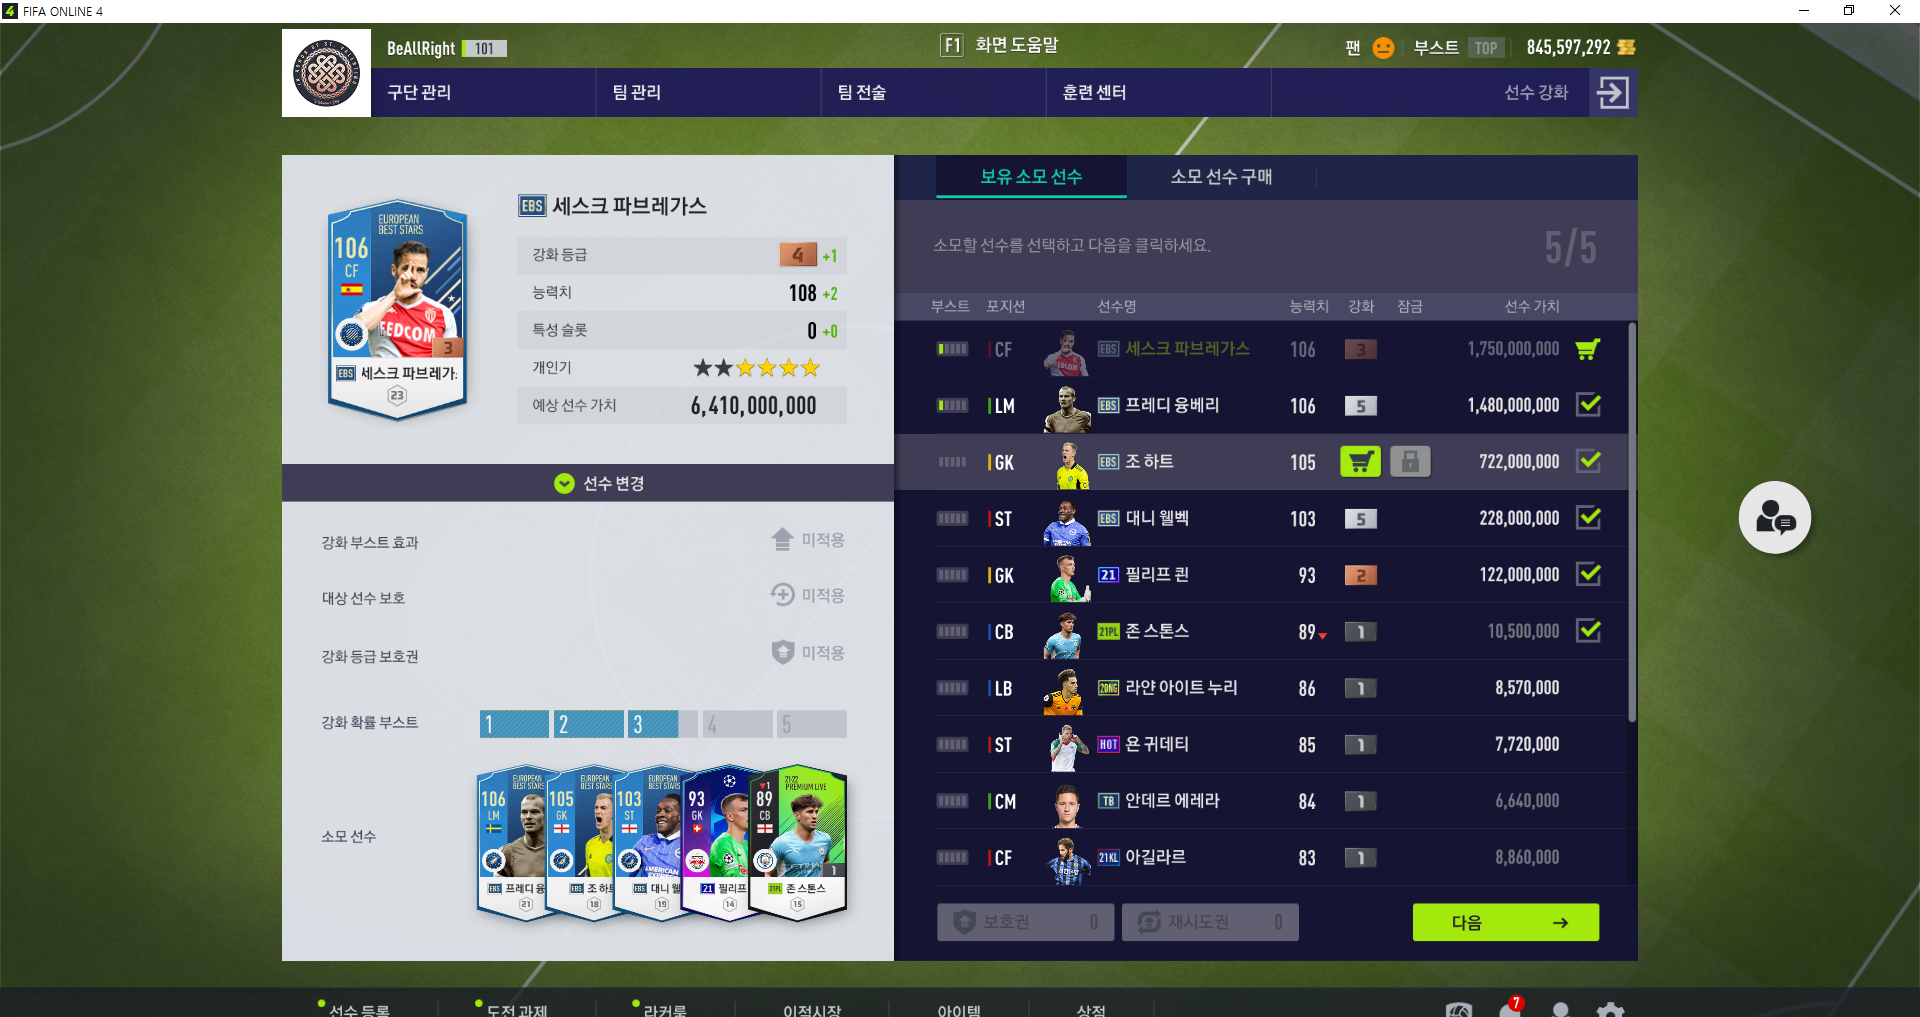 FIFA ONLINE 4 2022-03-12 오전 12_27_09.png